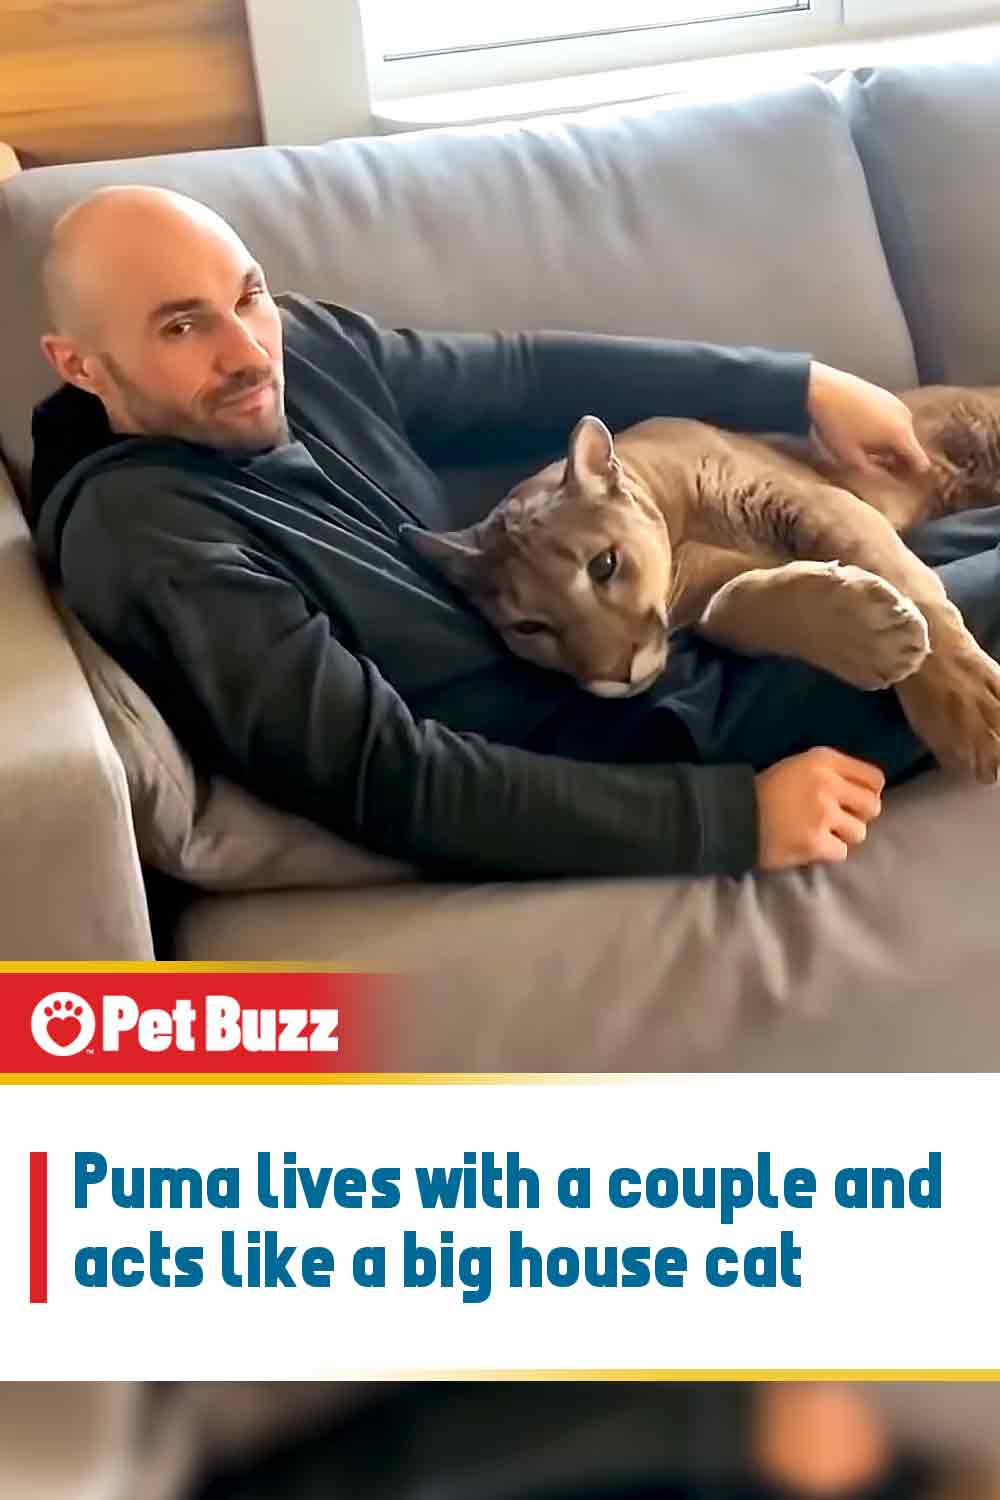 Puma lives with a couple and acts like a big house cat